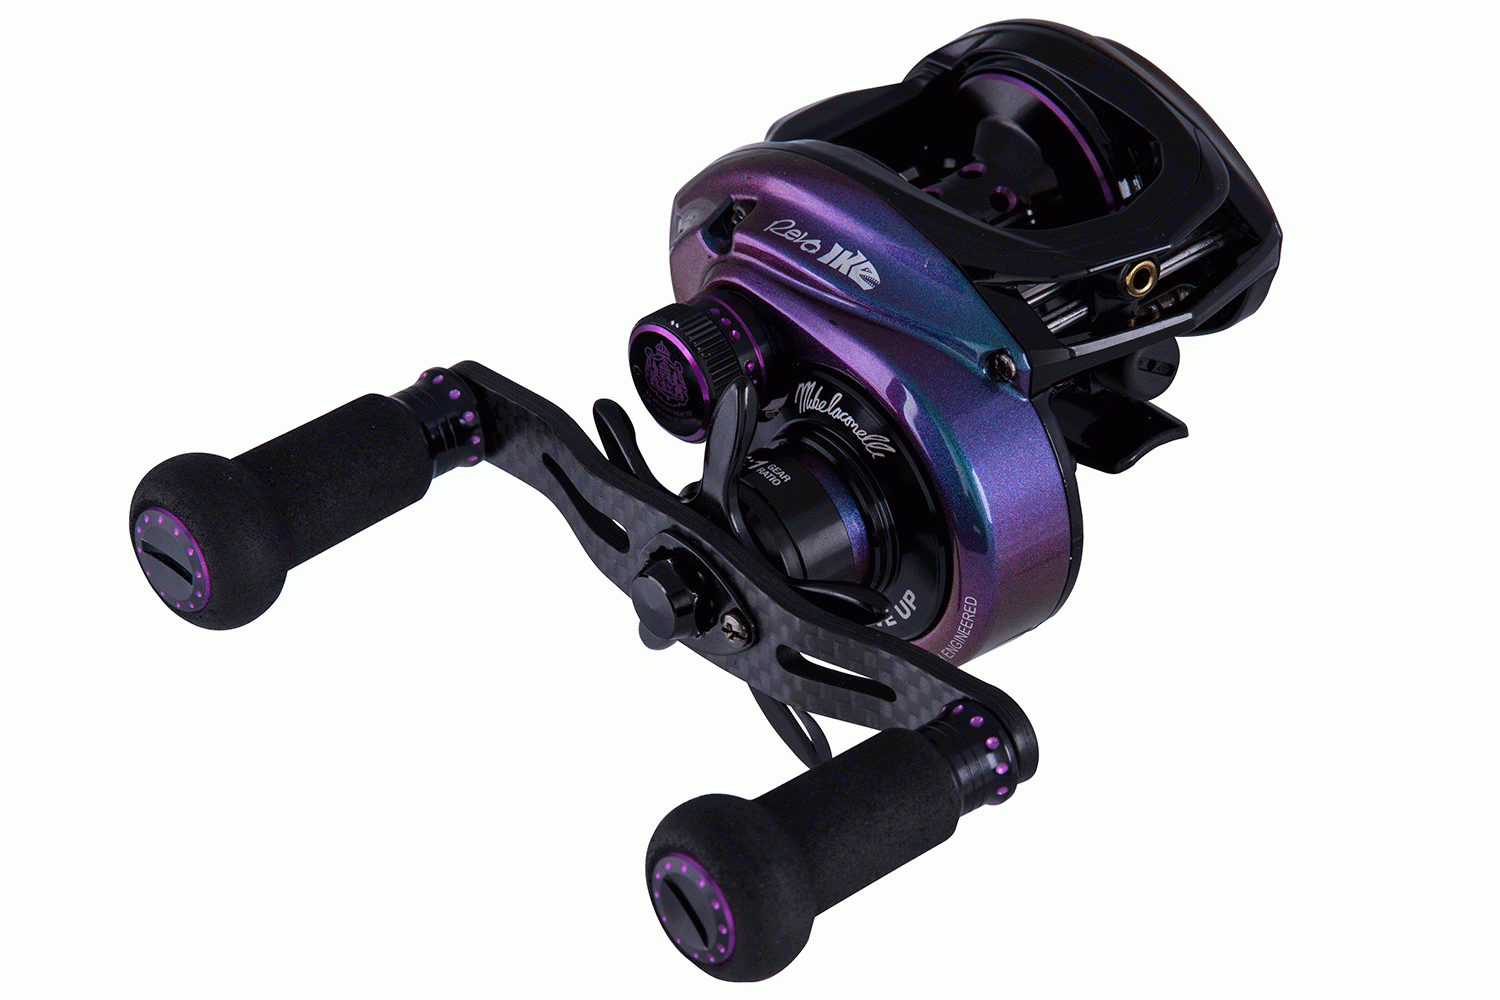 <p><b>Abu Garcia Revo Ike Signature Baitcasting Reels, $229.95</b></p> Mike Iaconelli, one of the most recognized professional freshwater bass anglers, and Abu Garcia have teamed up to create a unique series of Ike designed products tailored to the avid bass angler. The Abu Garcia Ike Series leverages Iaconelliâs angling expertise to deliver a series of baitcast reels designed with Ikeâs unmistakable cosmetics. <br> <a href=